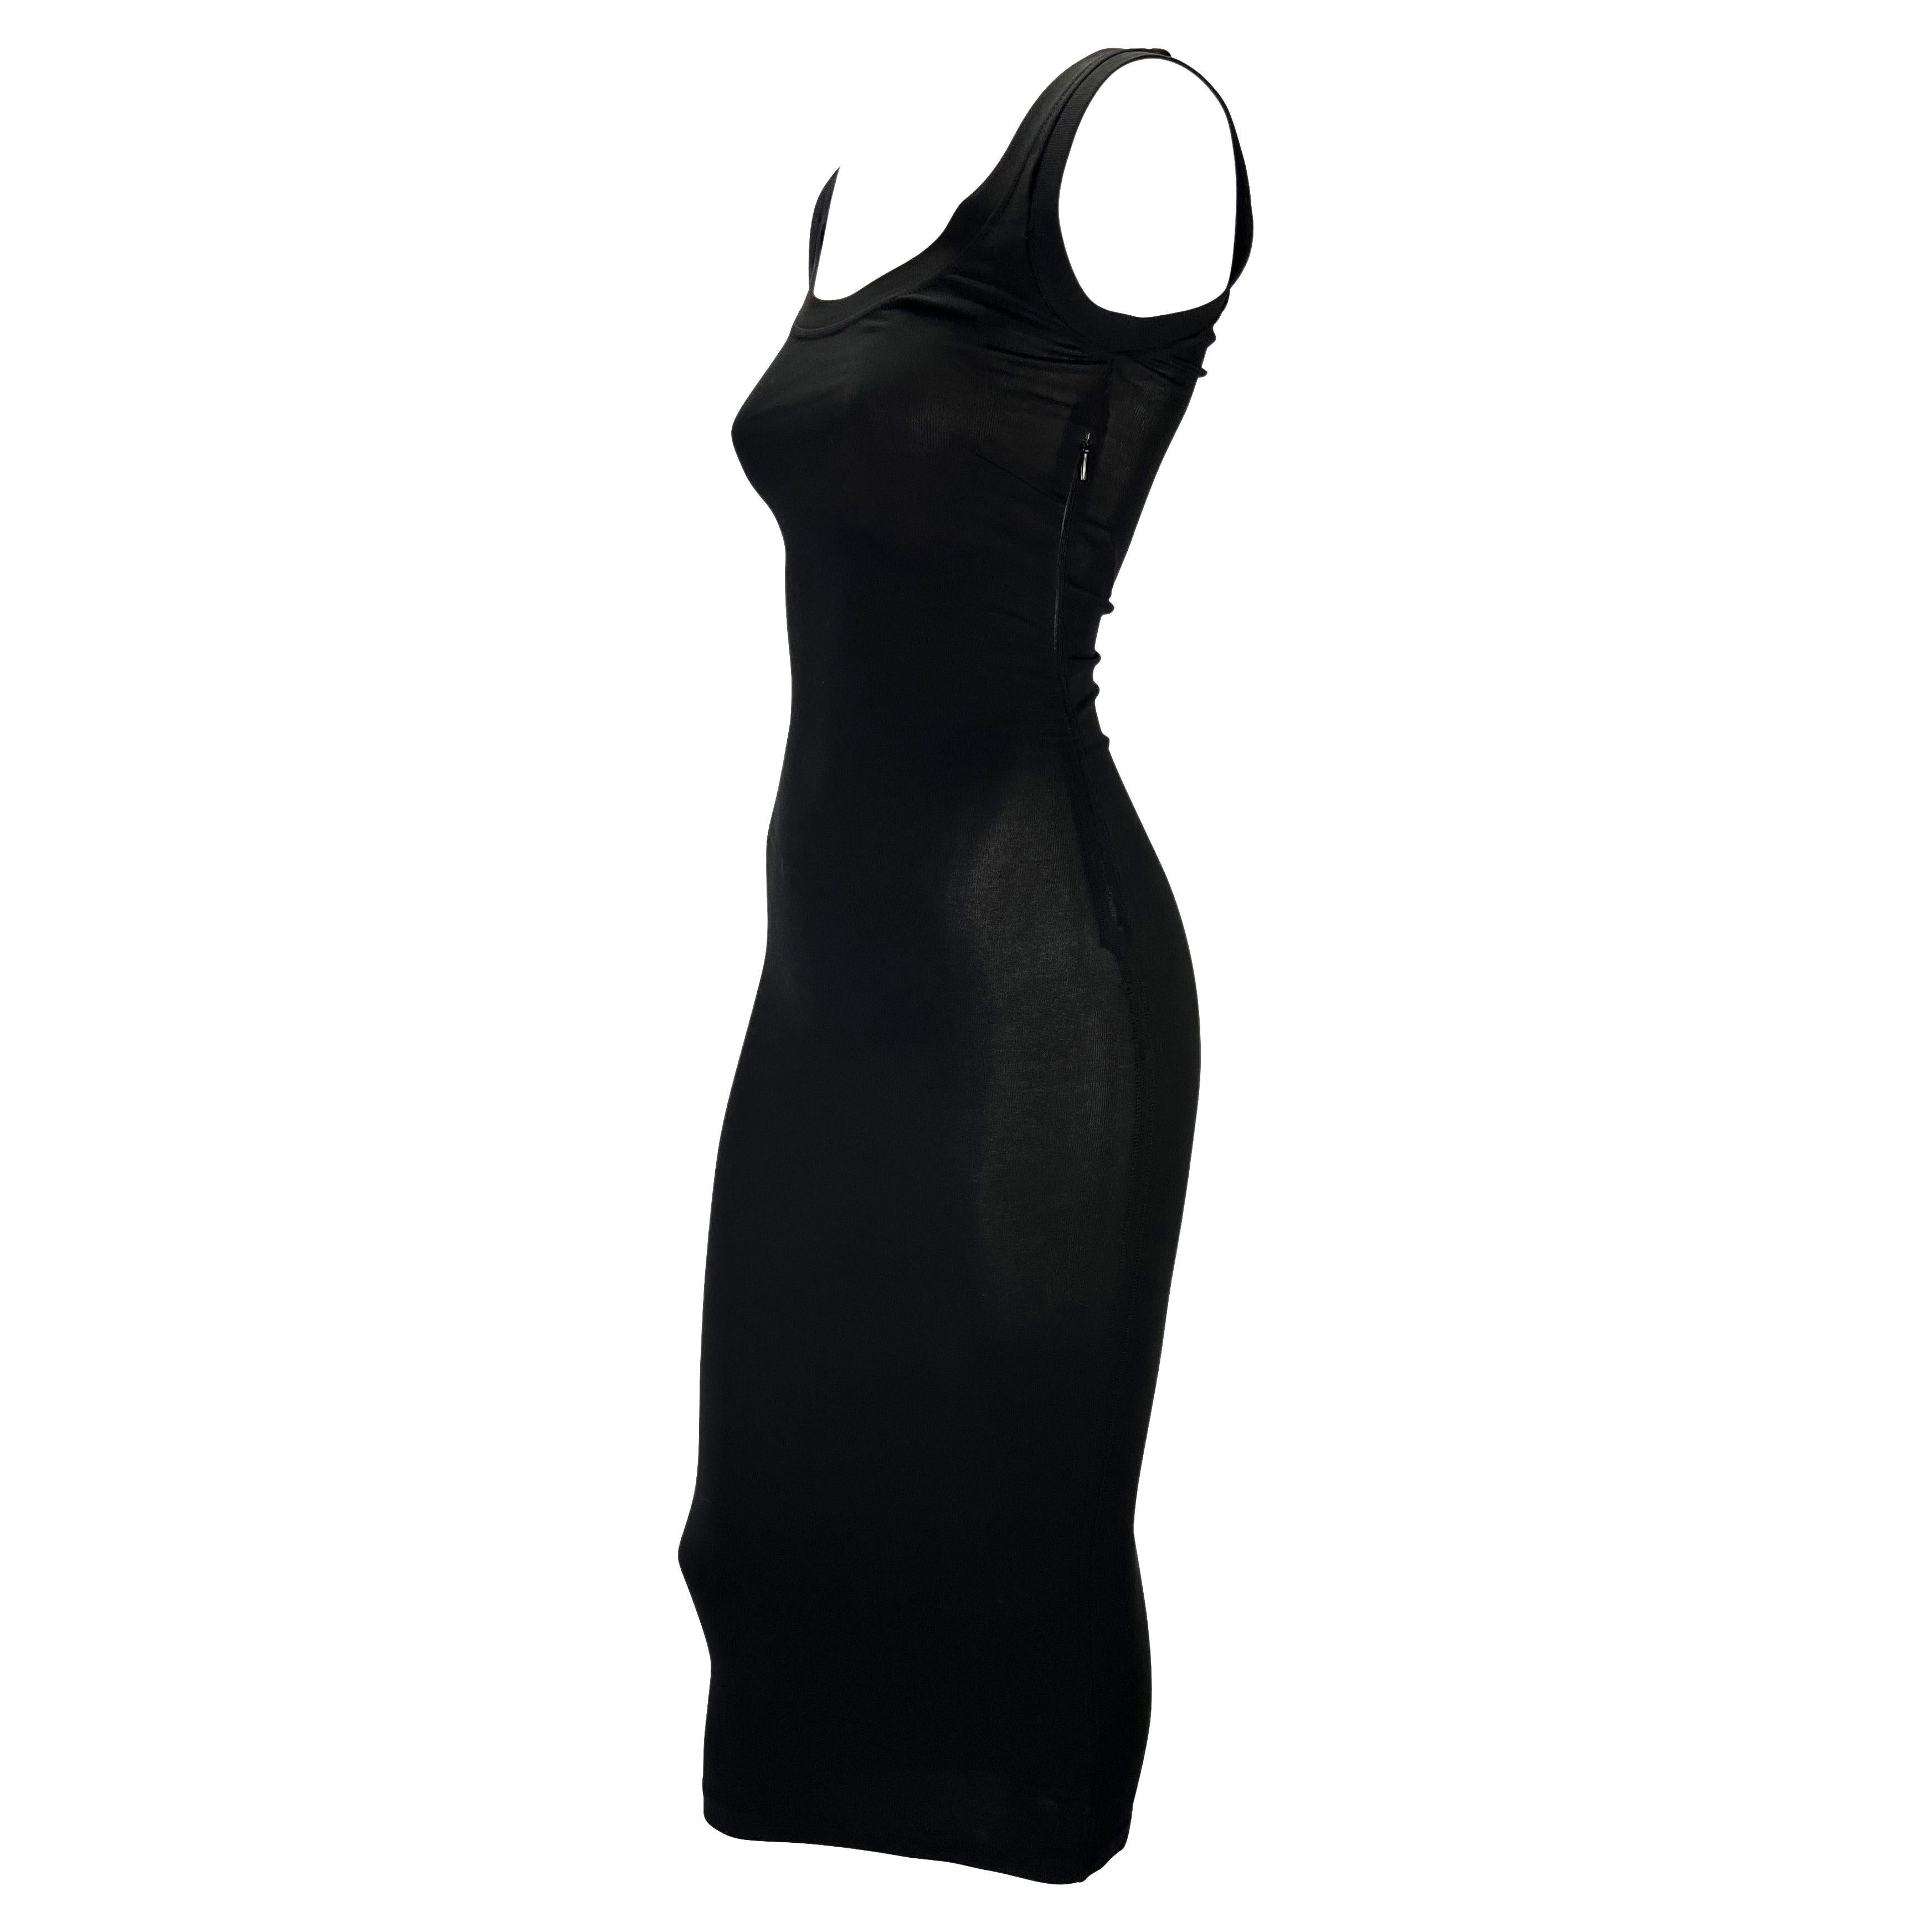 S/S 2003 Dolce & Gabbana 'Sex & Love' Stretch Black Tank Dress In Good Condition For Sale In West Hollywood, CA